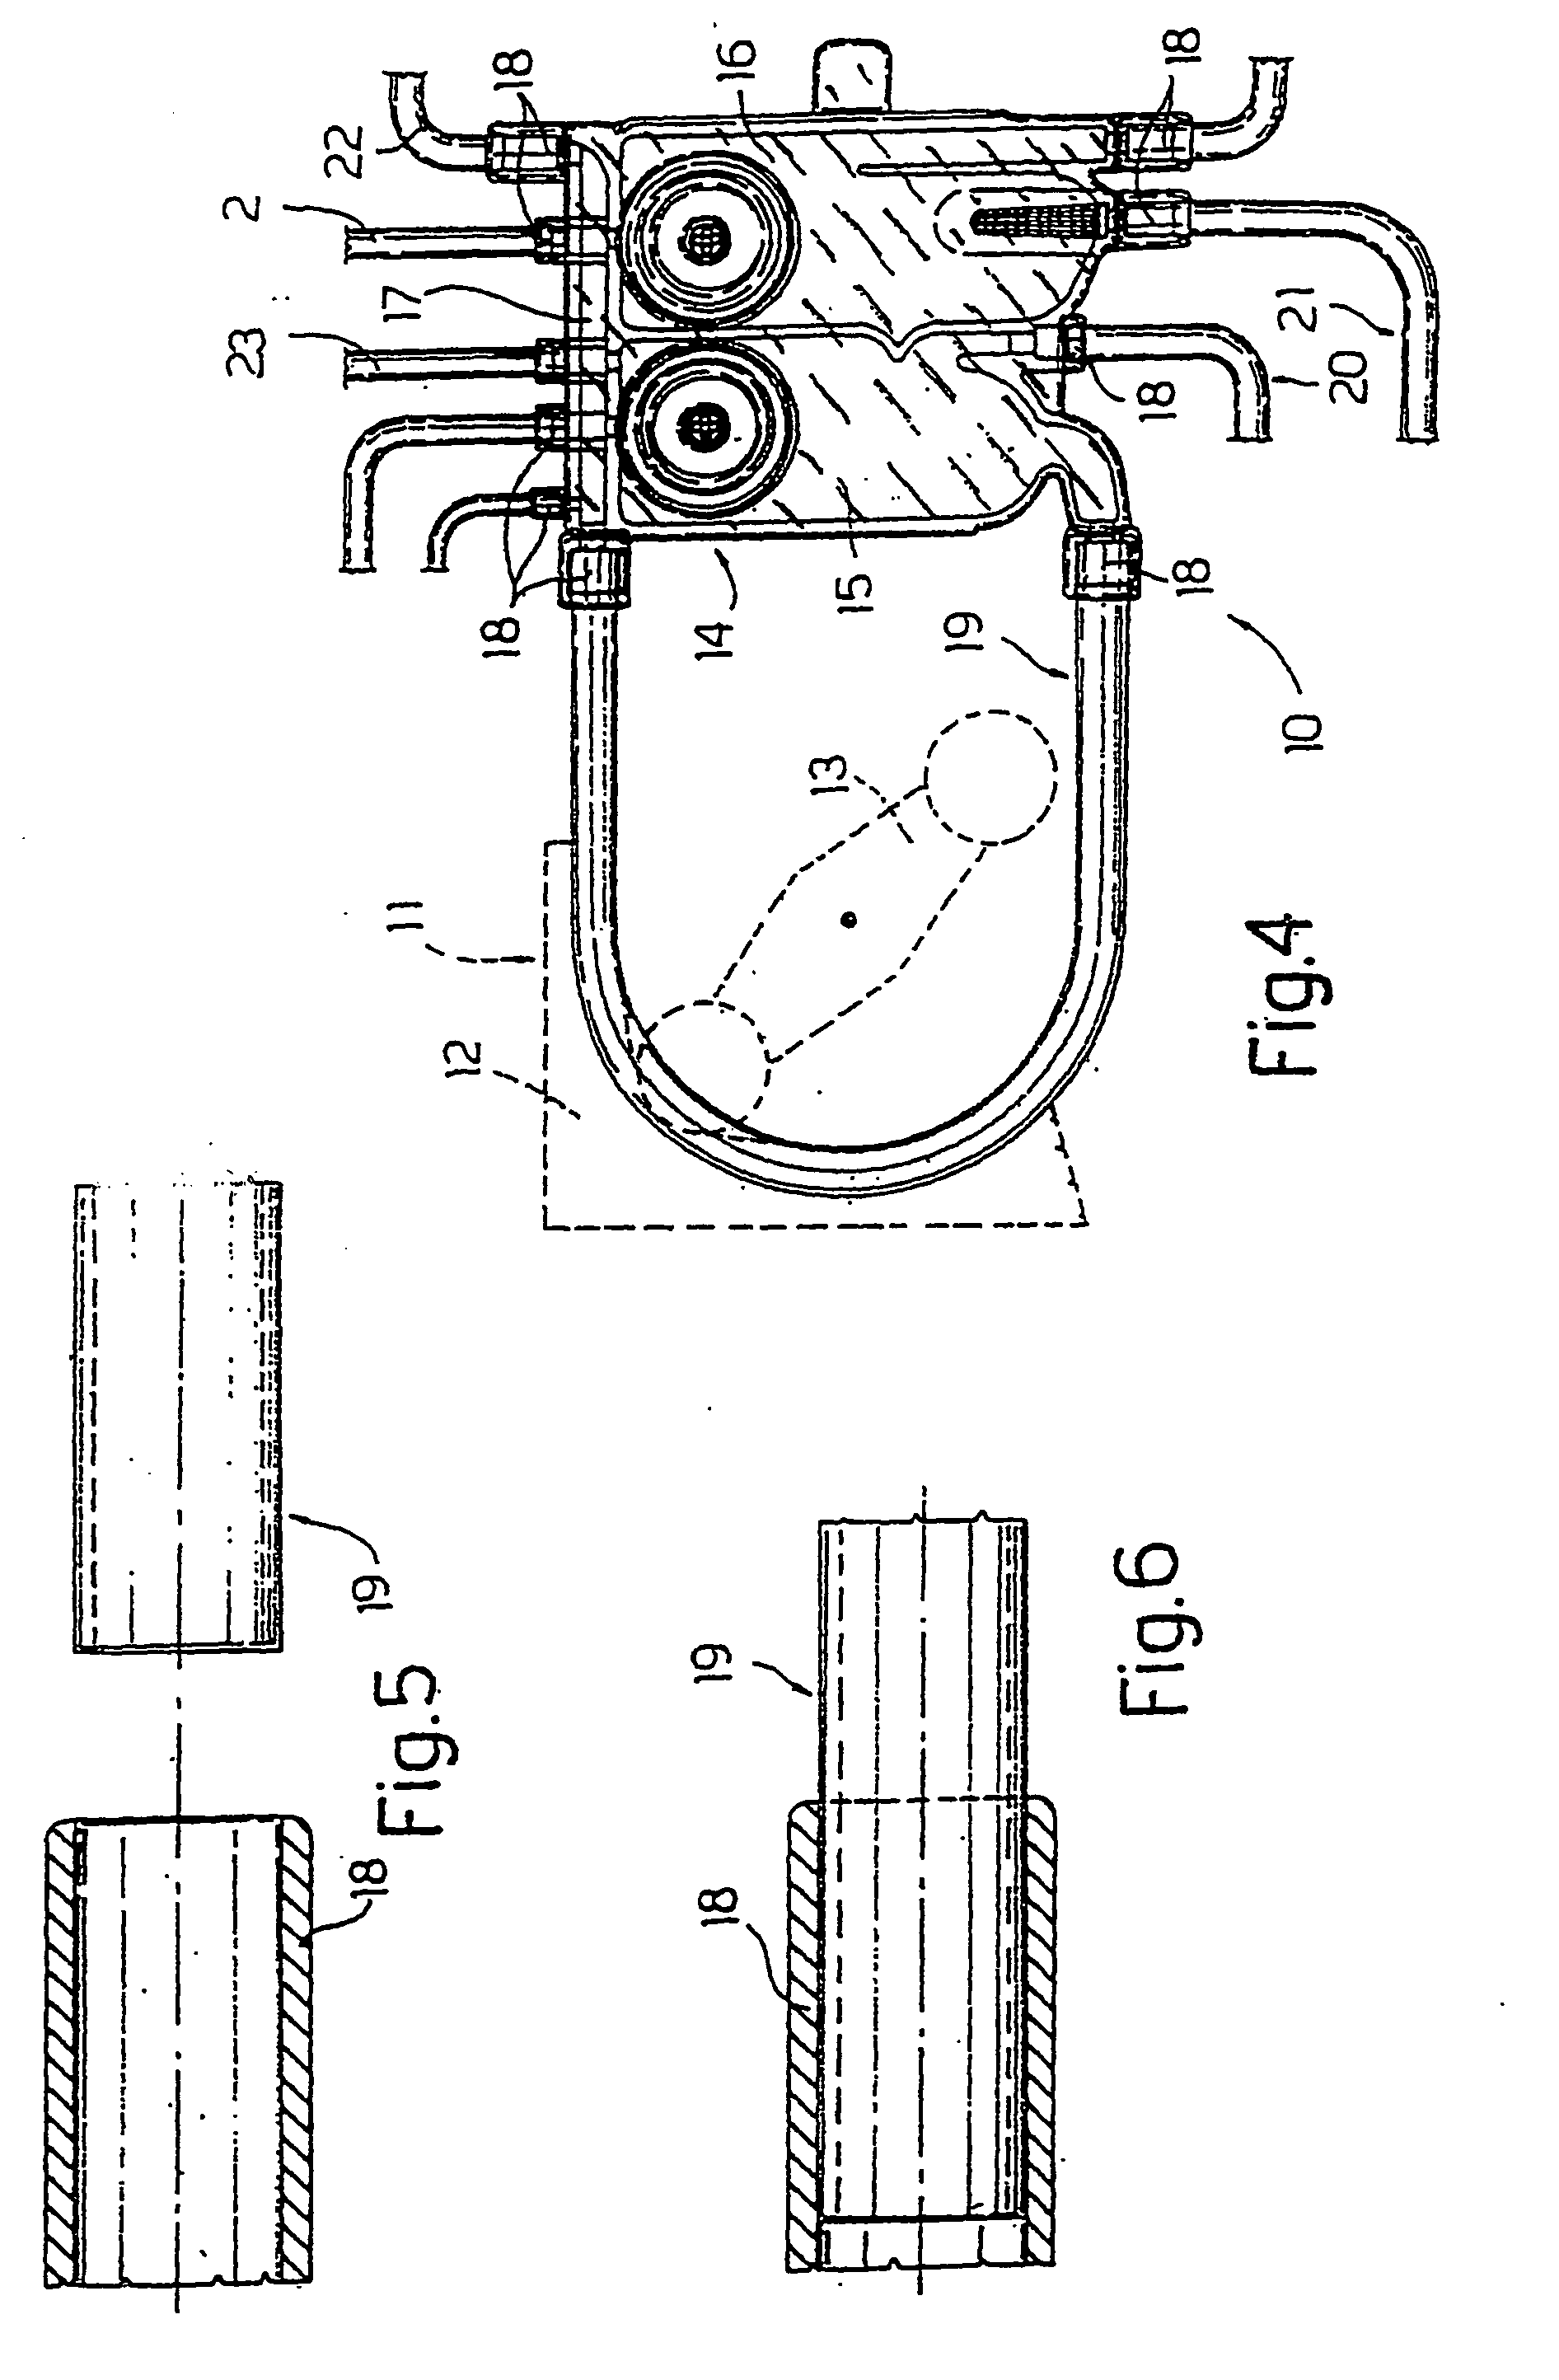 Tube for medical applications and circuit incorporating such tube